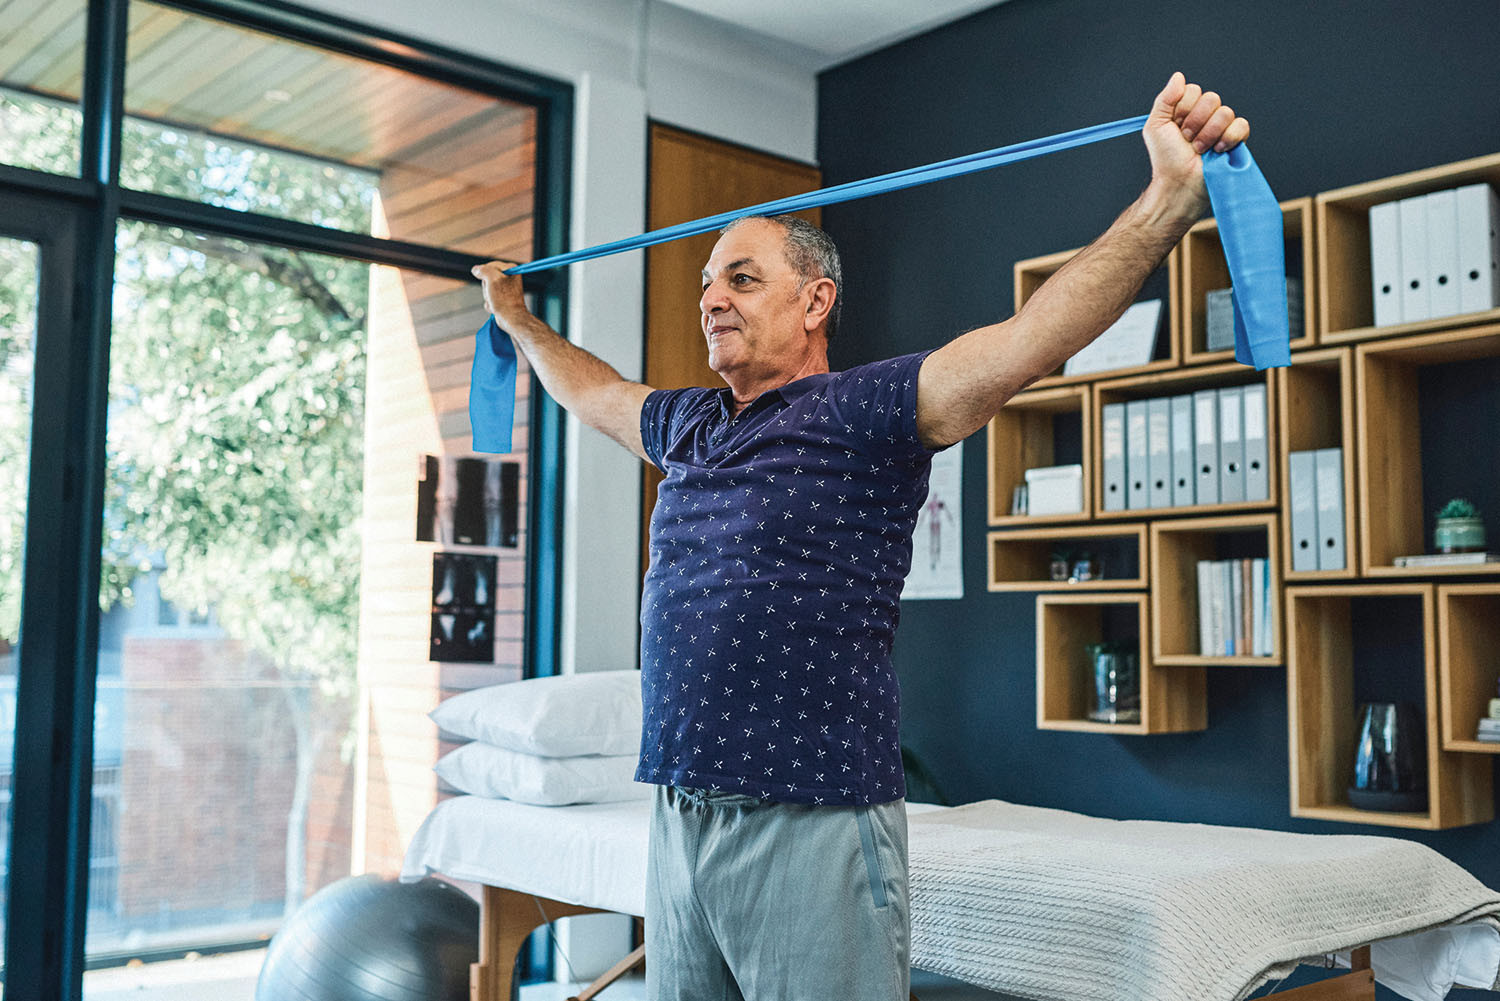 photo of a mature man exercising at home using rubber exercise bands